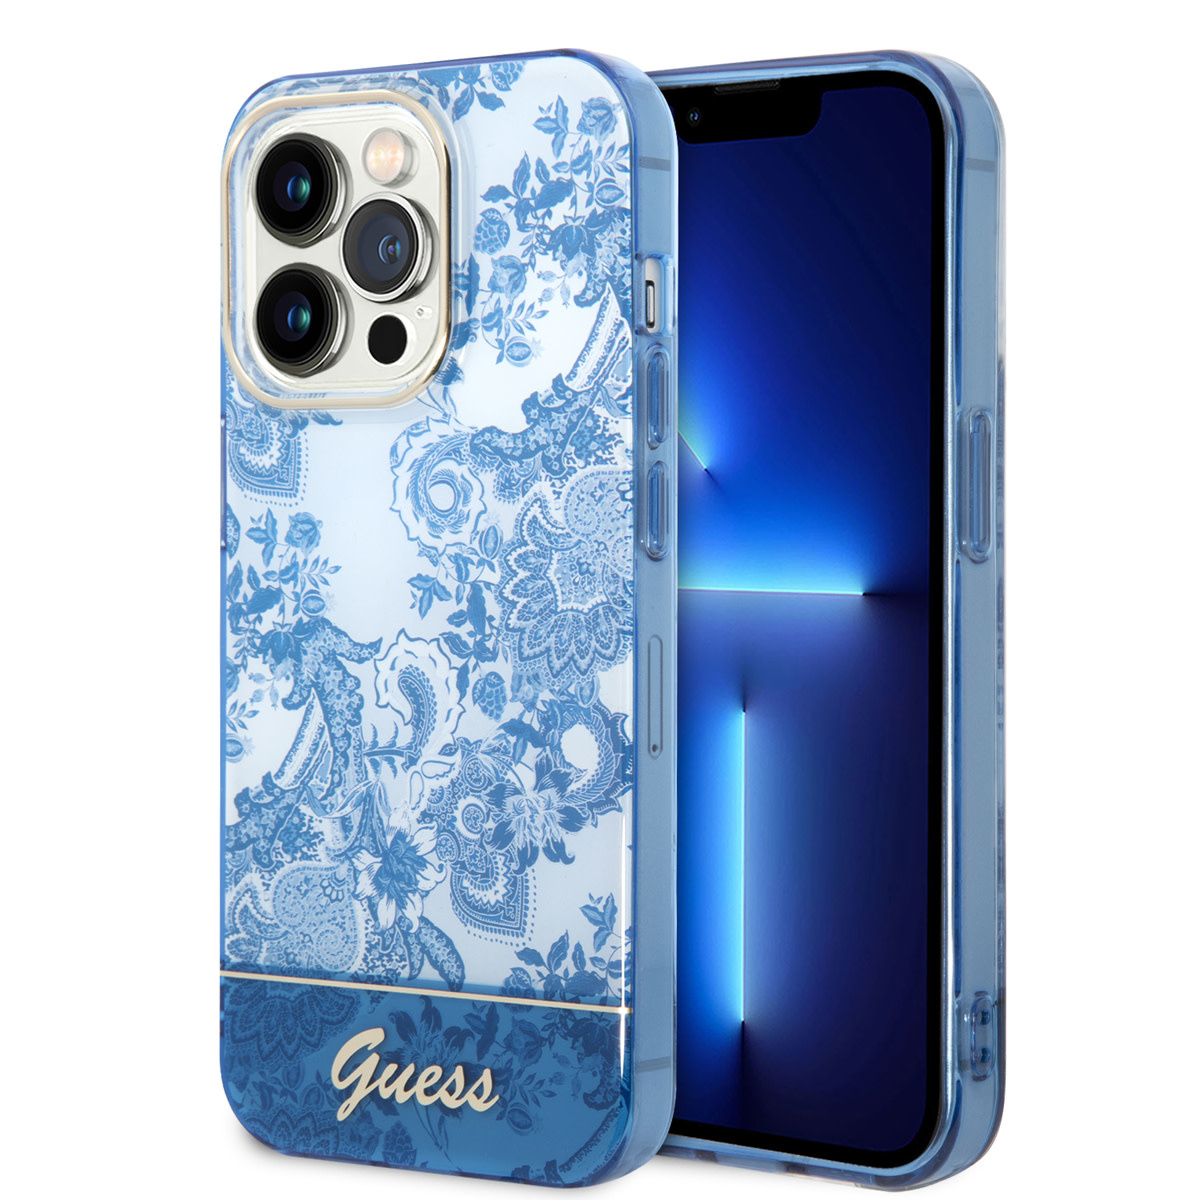 Guess iPhone 14 Pro Max Hardcase Backcover - Porselein Collectie Blauw - Mobiel - Nederland